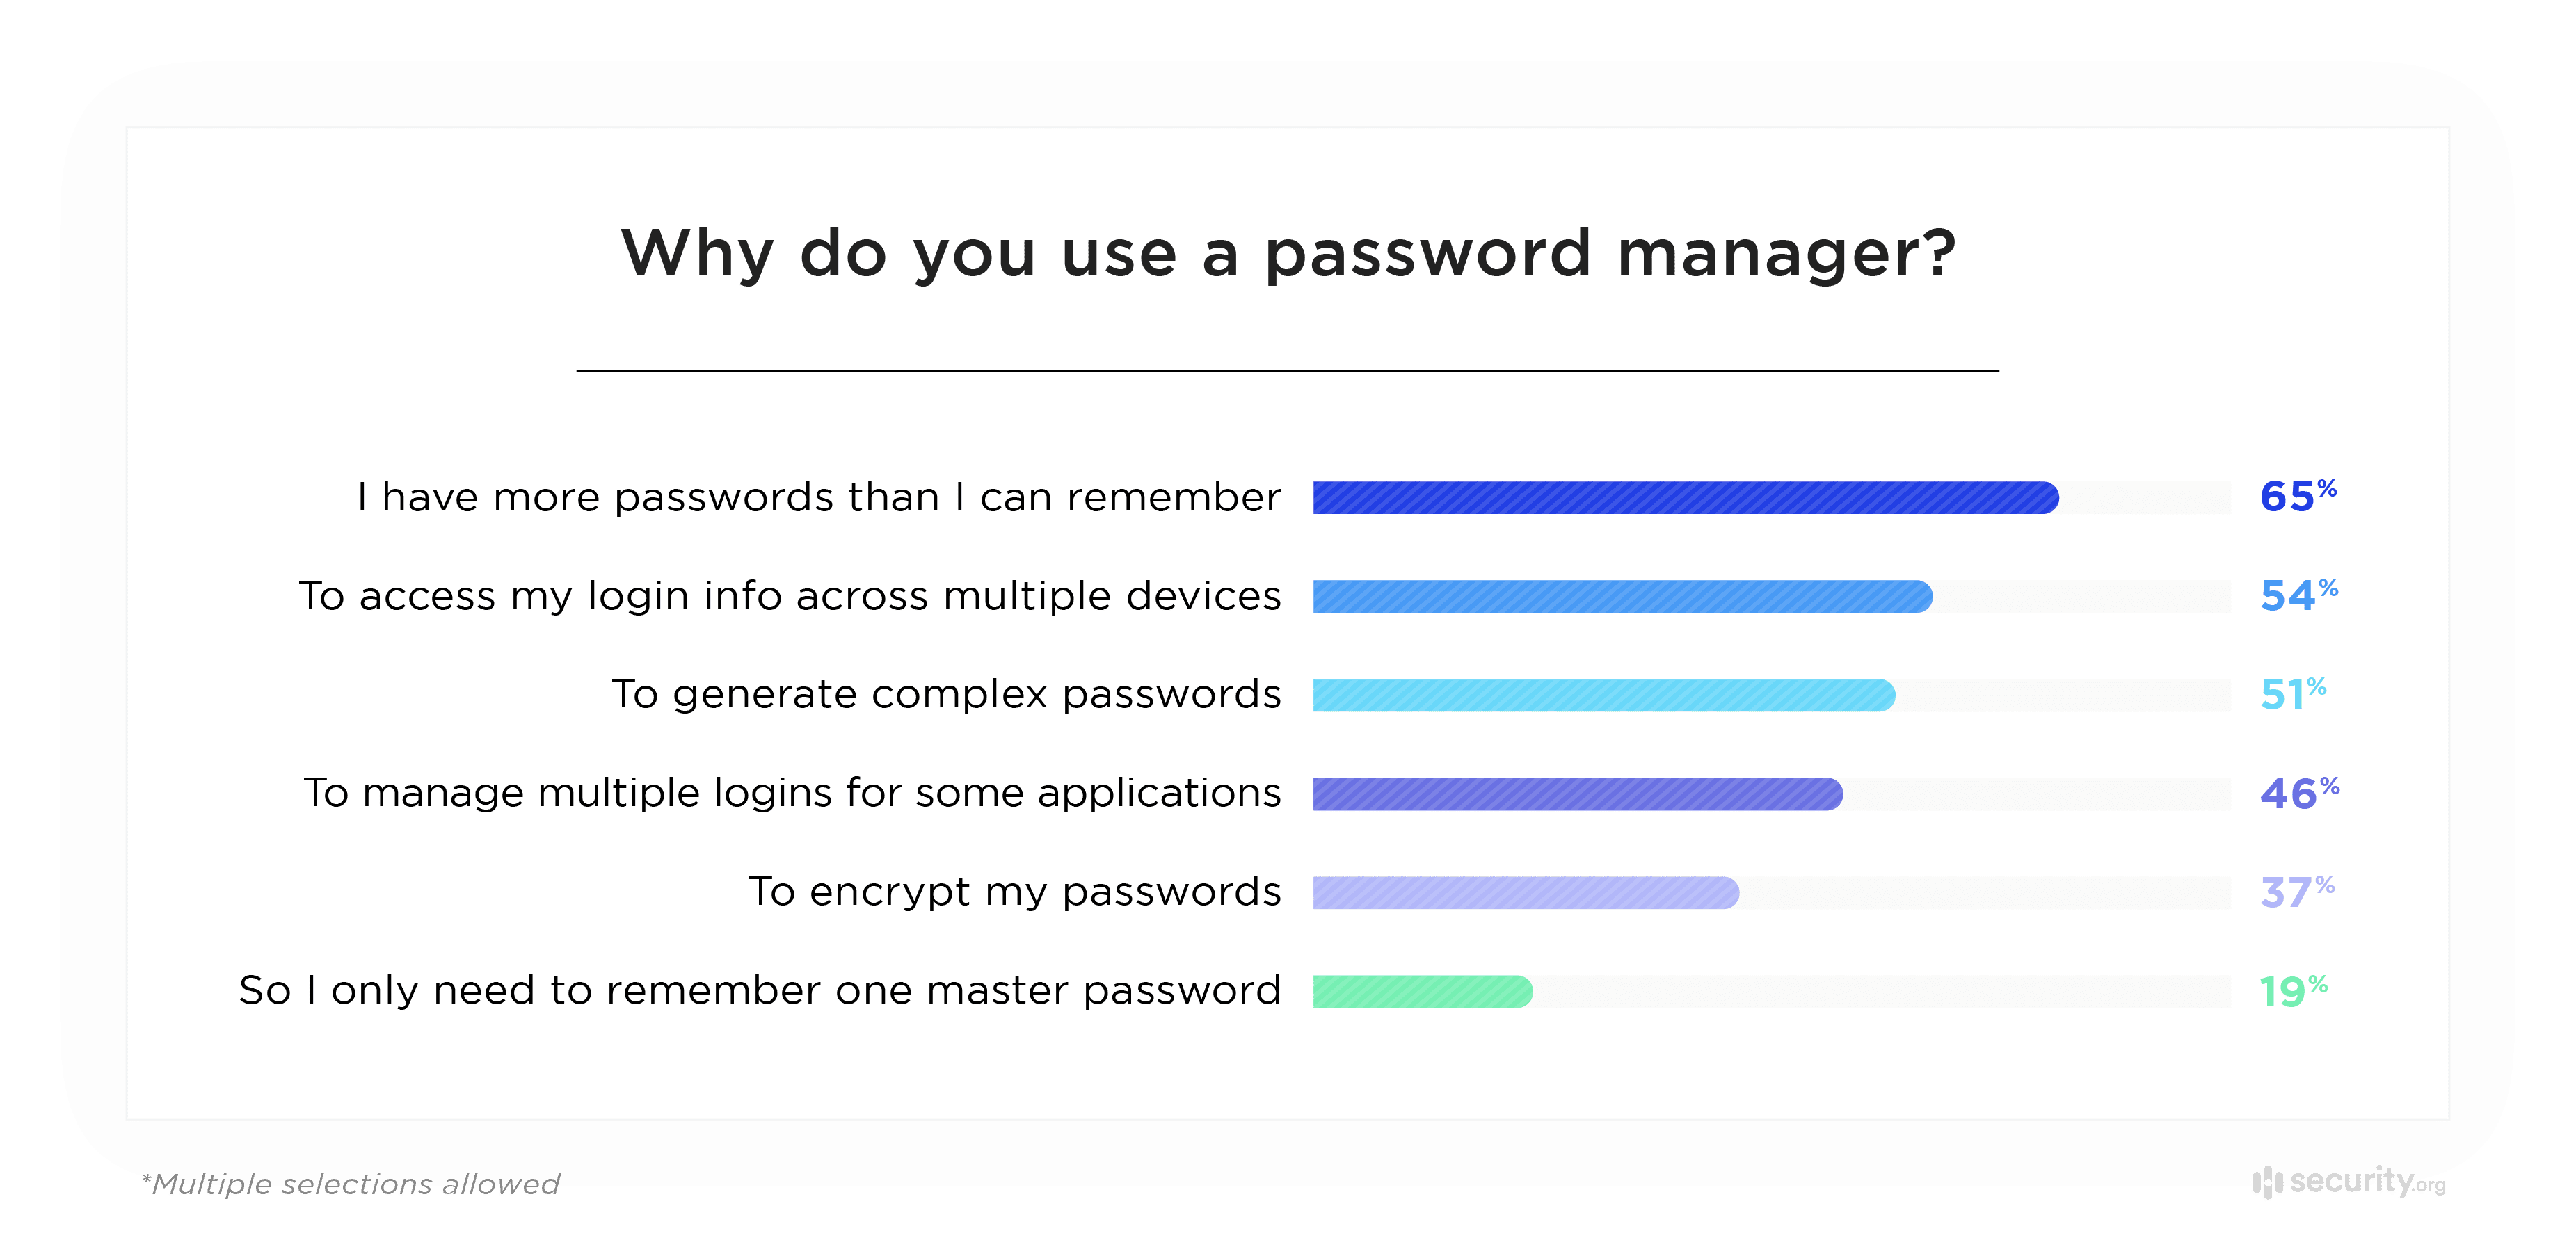 Why do you use a password manager